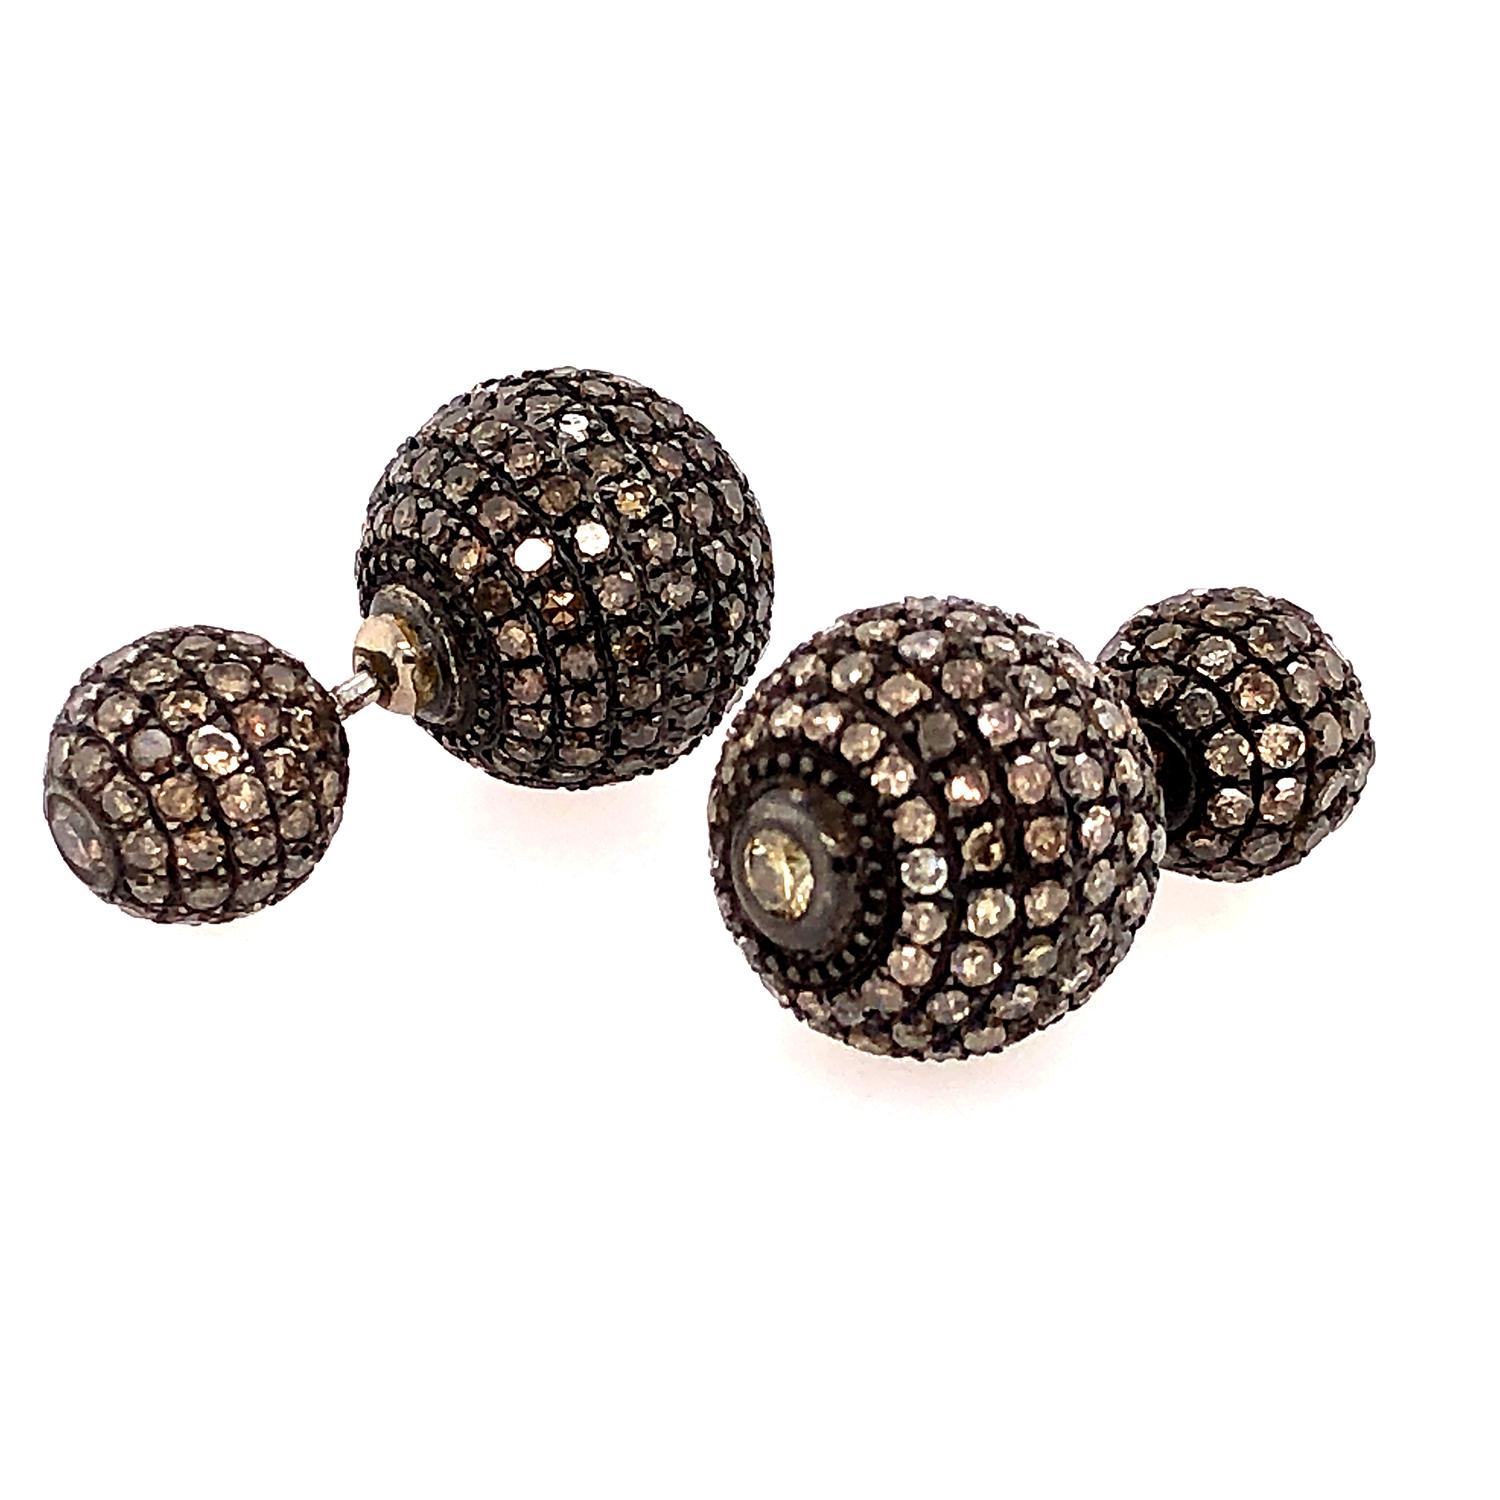 The earrings feature a round ball shape, encrusted with sparkling diamonds in a pave setting. These earrings a tunnel design, which allows them to be worn through the earlobe for a stylish and modern look. These earrings are perfect for dressing up